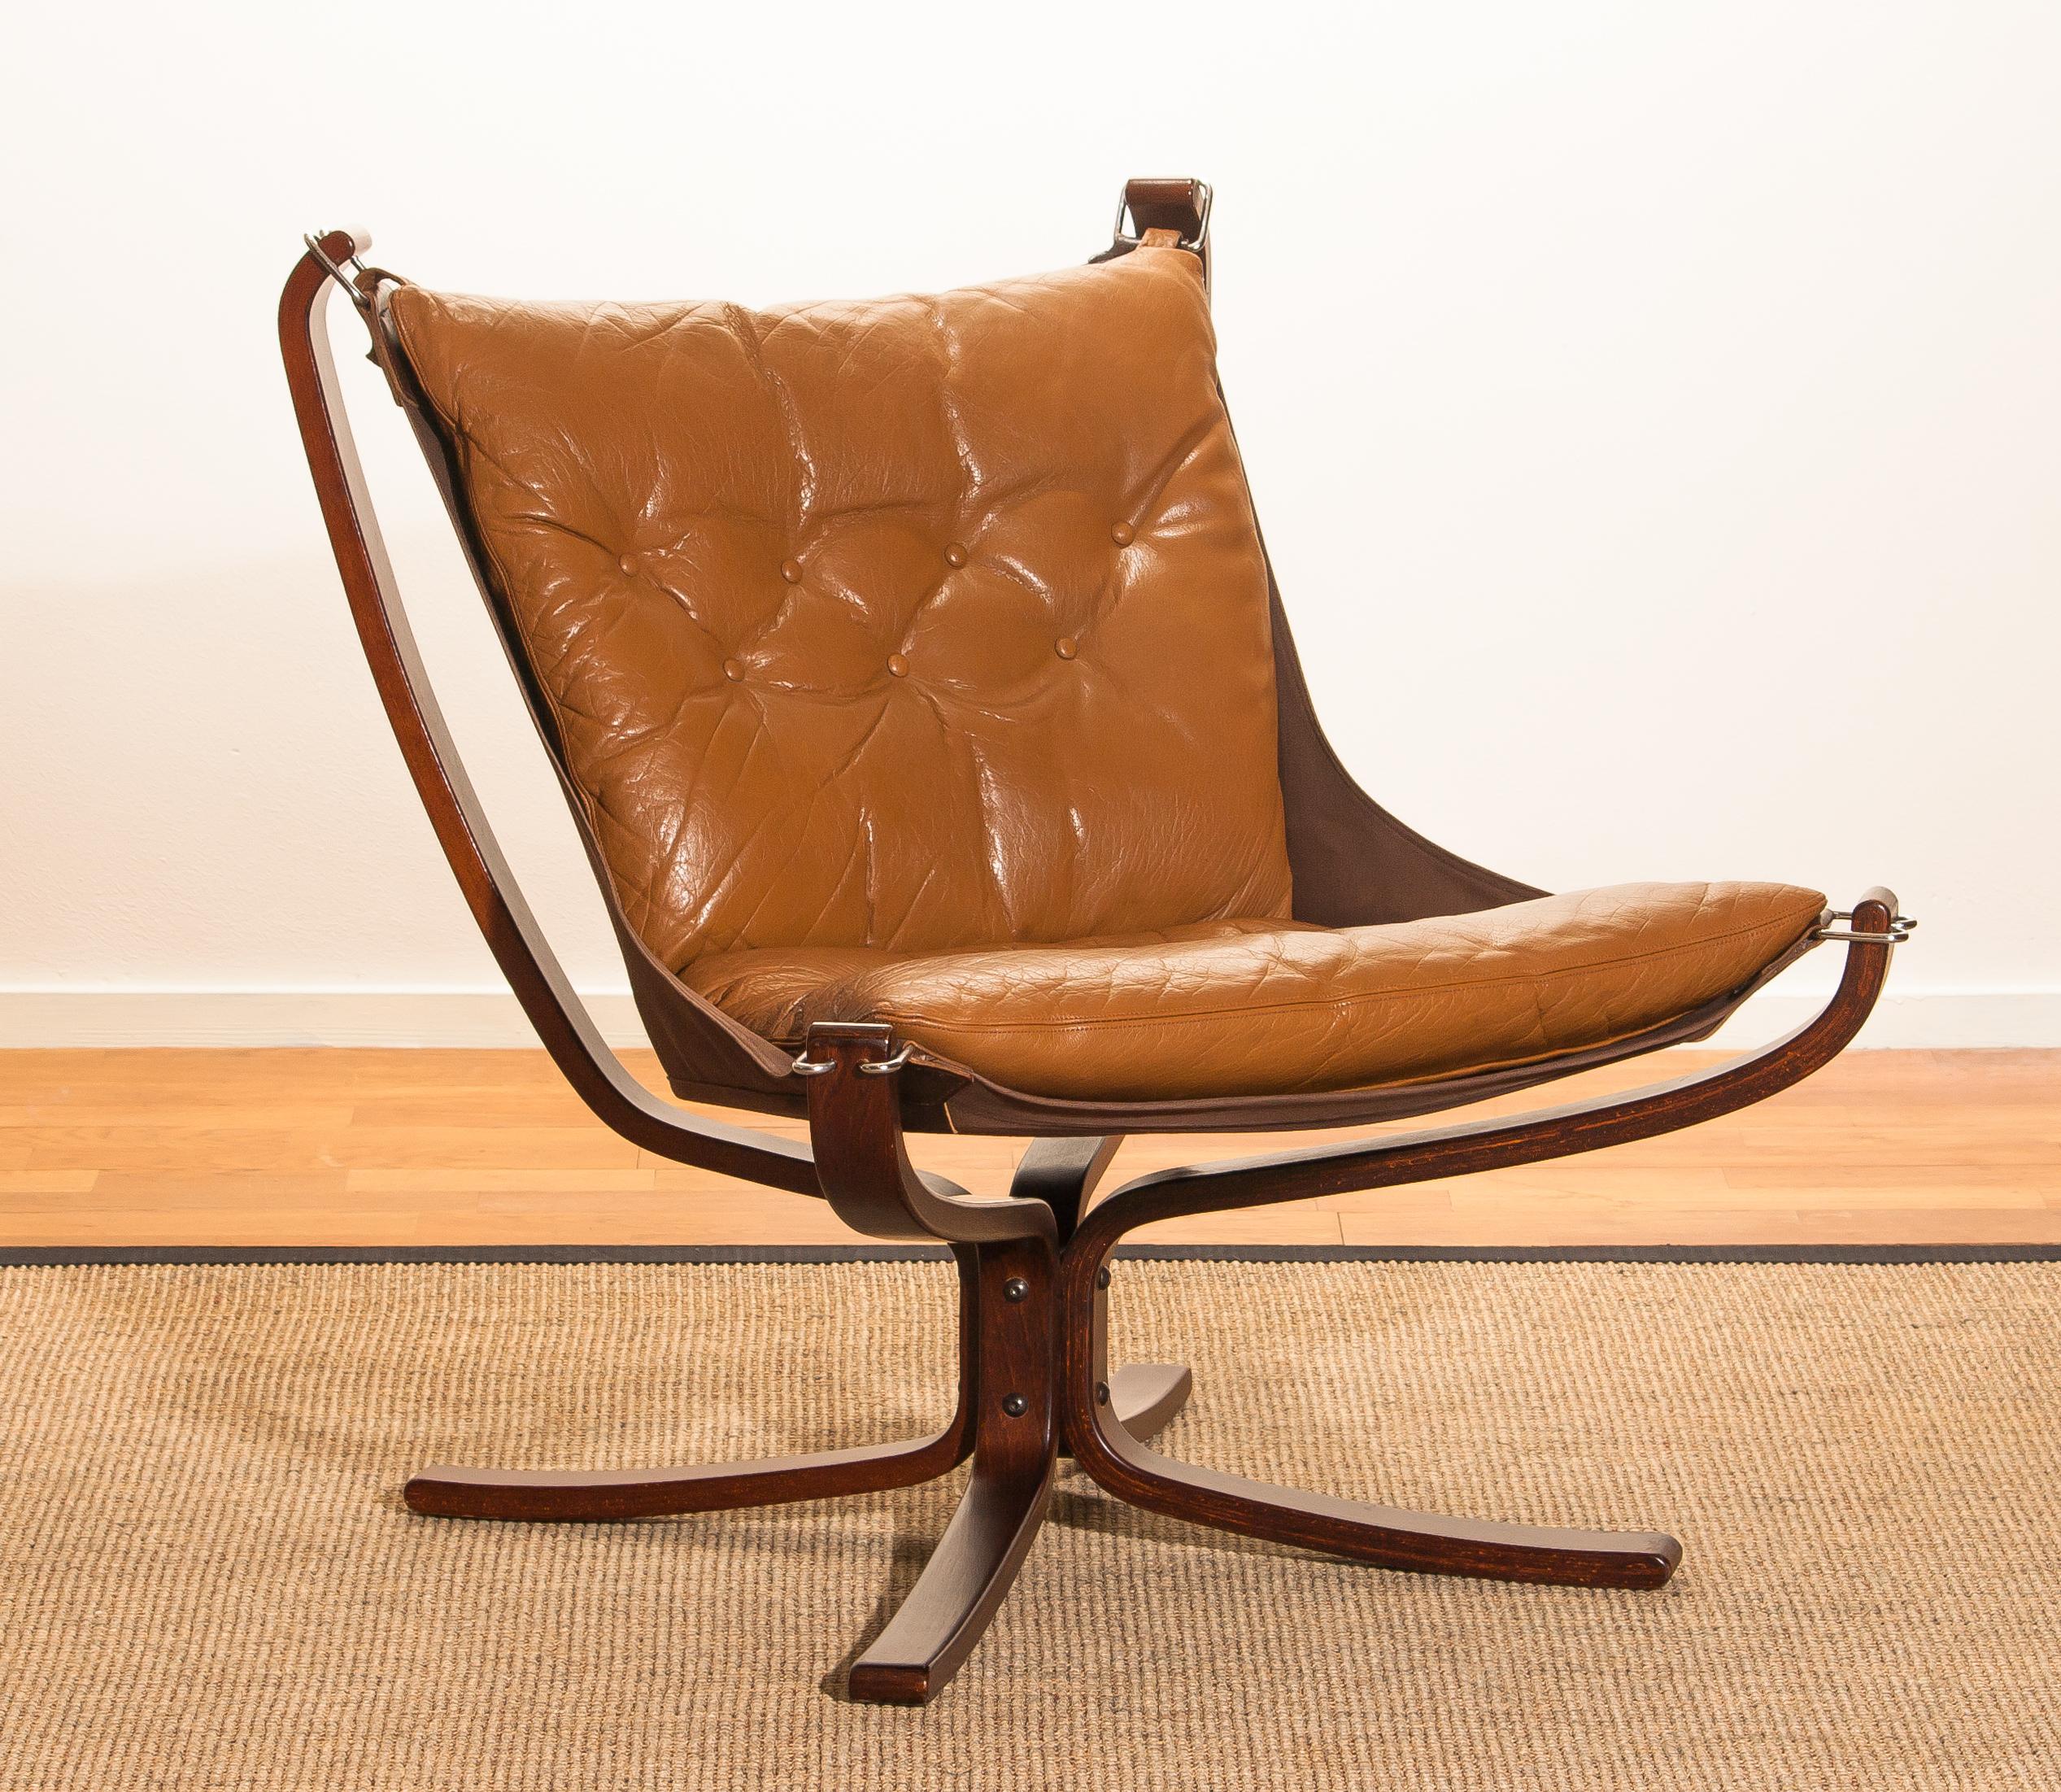 Wonderful armchair designed by Sigurd Ressell Norway.
The chair is in a very good original condition.
Both, the camel leather seating as the wooden frame are in perfect condition.
Period 1970s.
Dimensions: H 100 cm, W 80 cm, D 80 cm, SH 40 cm.
 